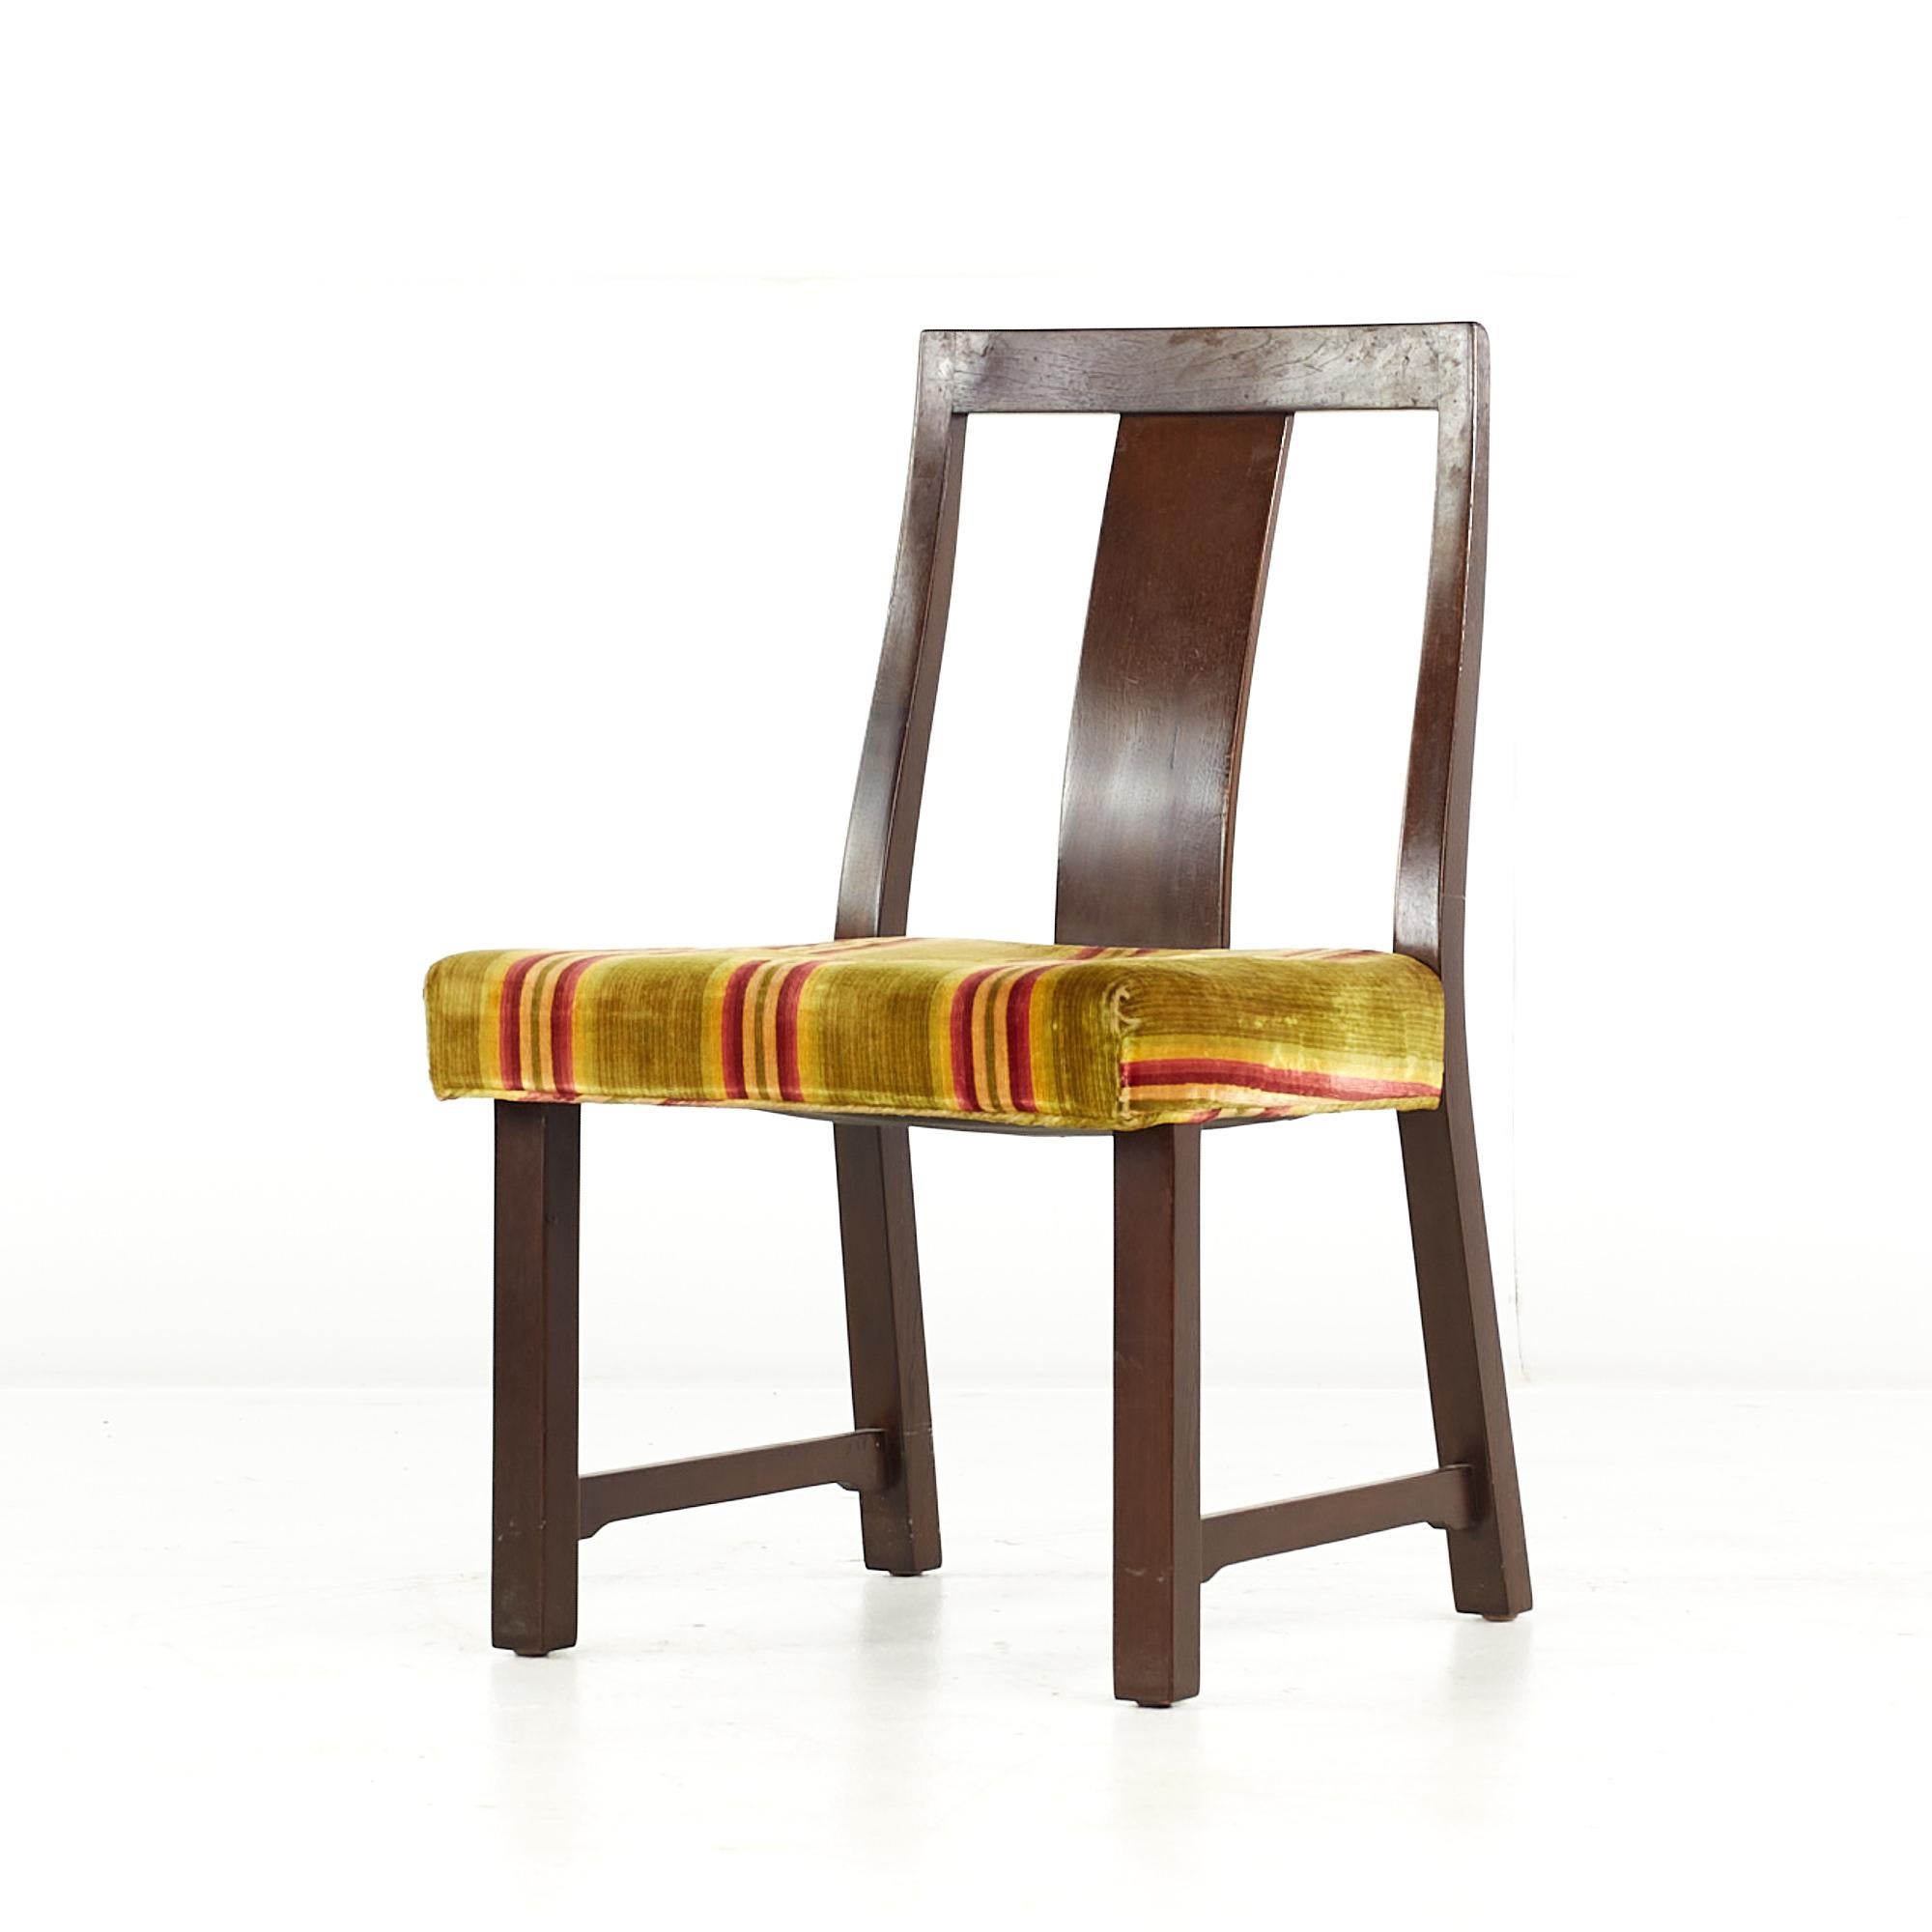 Late 20th Century Edward Wormley for Dunbar Mid Century Mahogany Dining Chairs, Set of 8 For Sale